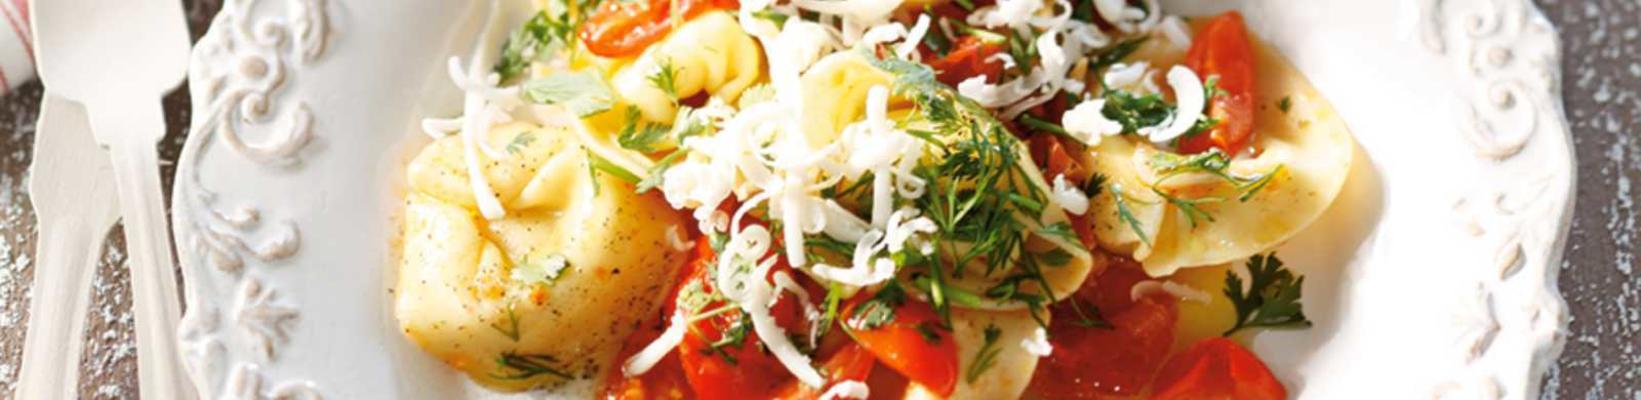 cheese tortellini with cherry tomatoes, olive oil and fresh herbs